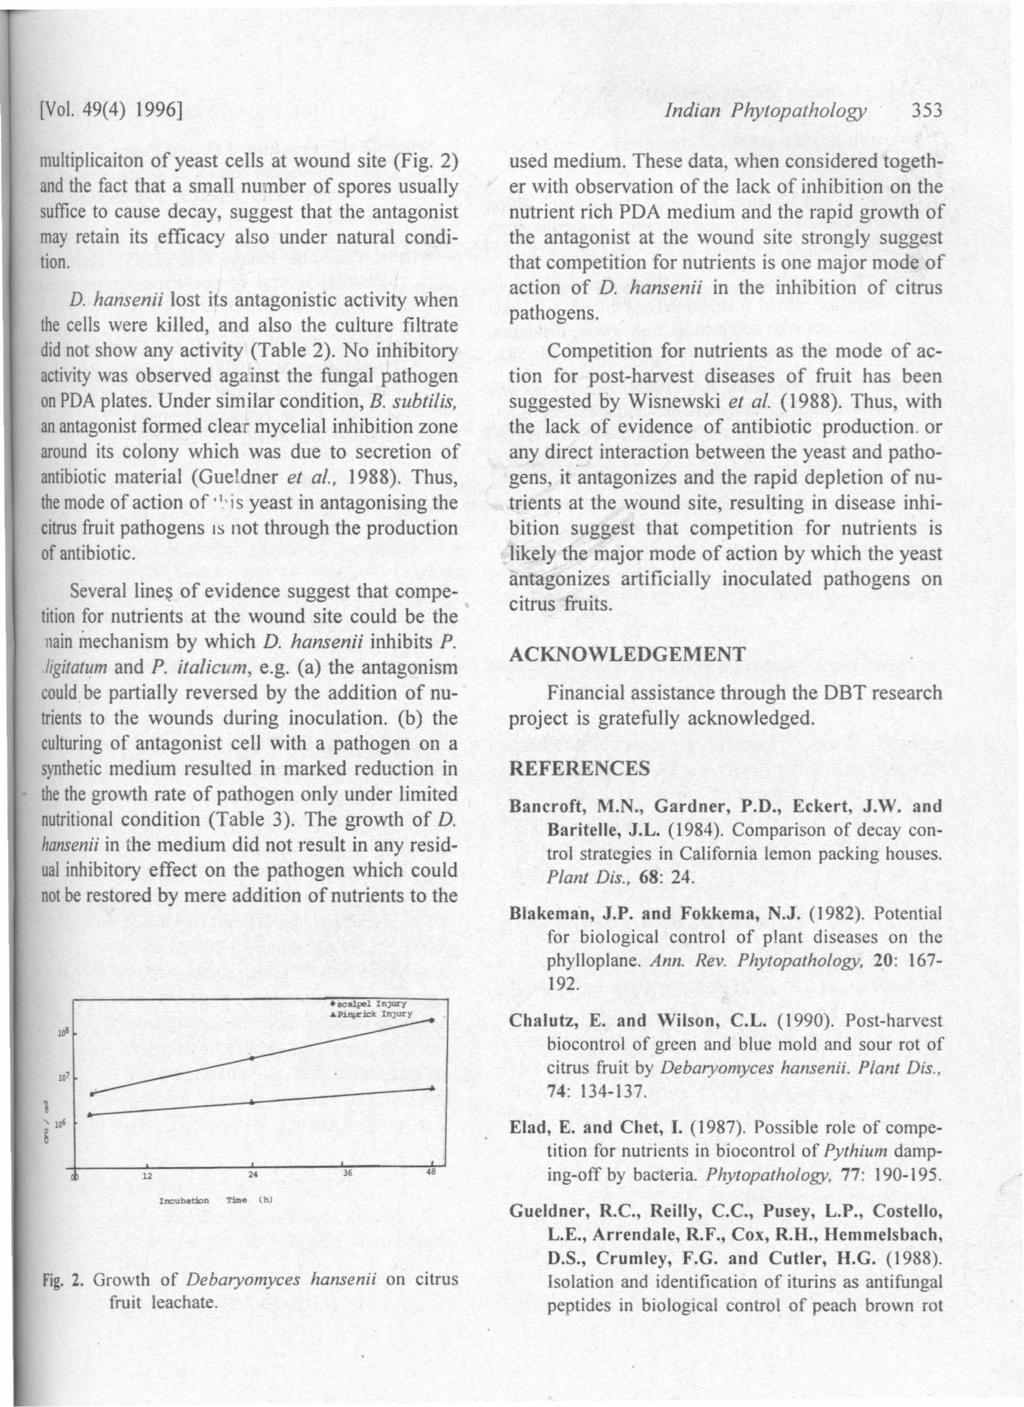 [Vol. 49(4) 1996] multiplicaiton of yeast cells at wound site (Fig.